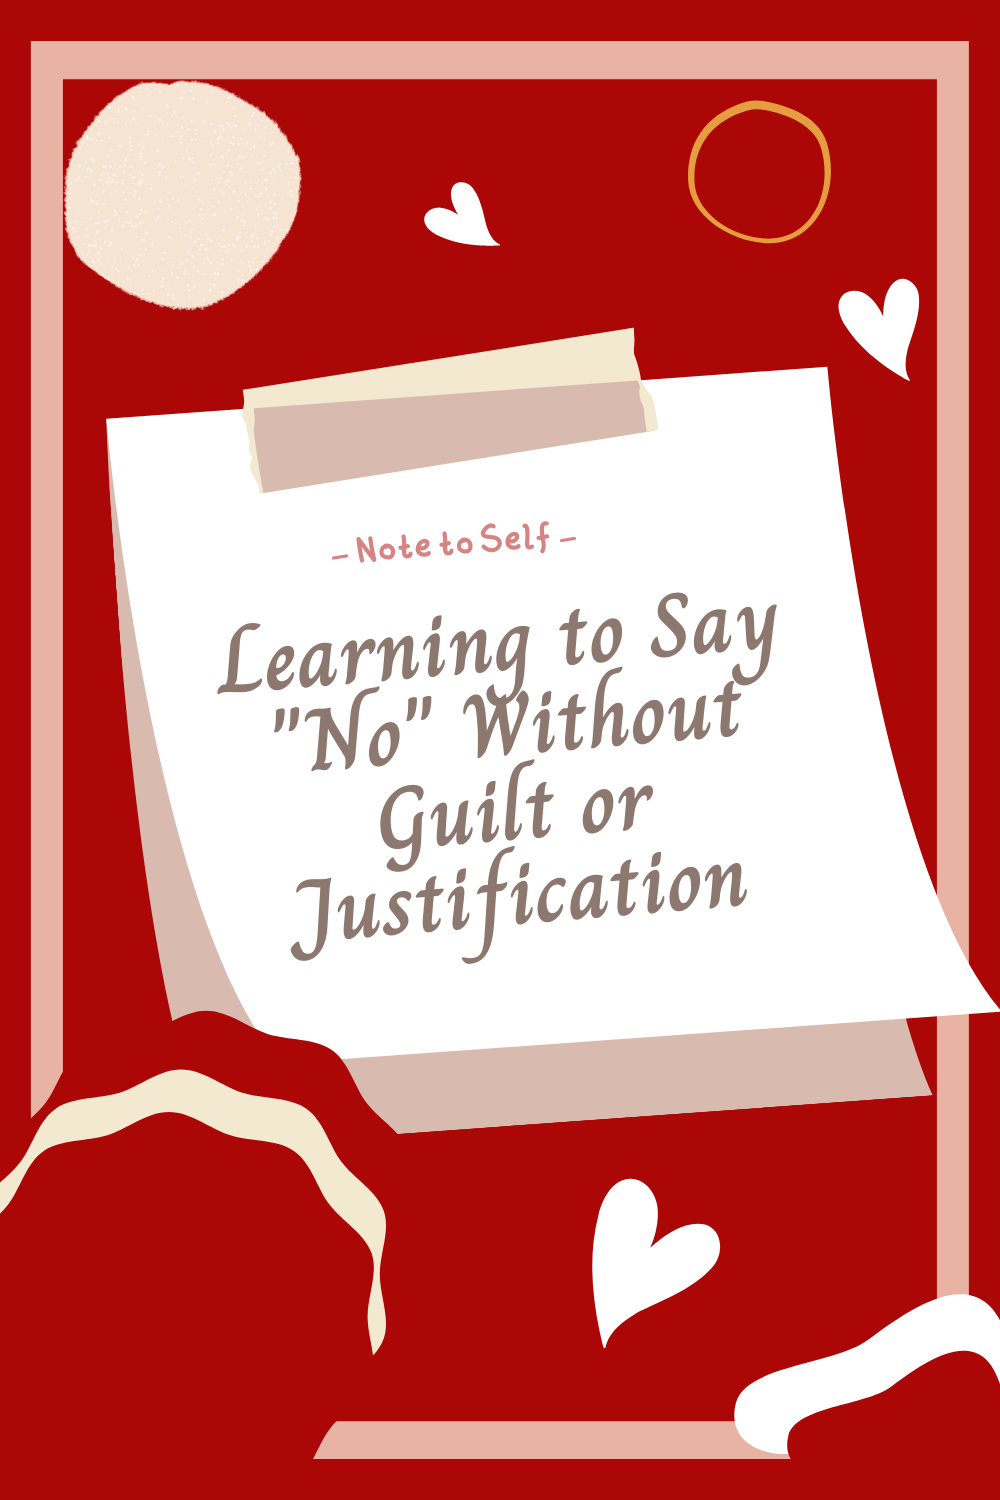 Learning to Say “No” Without Guilt or Justification